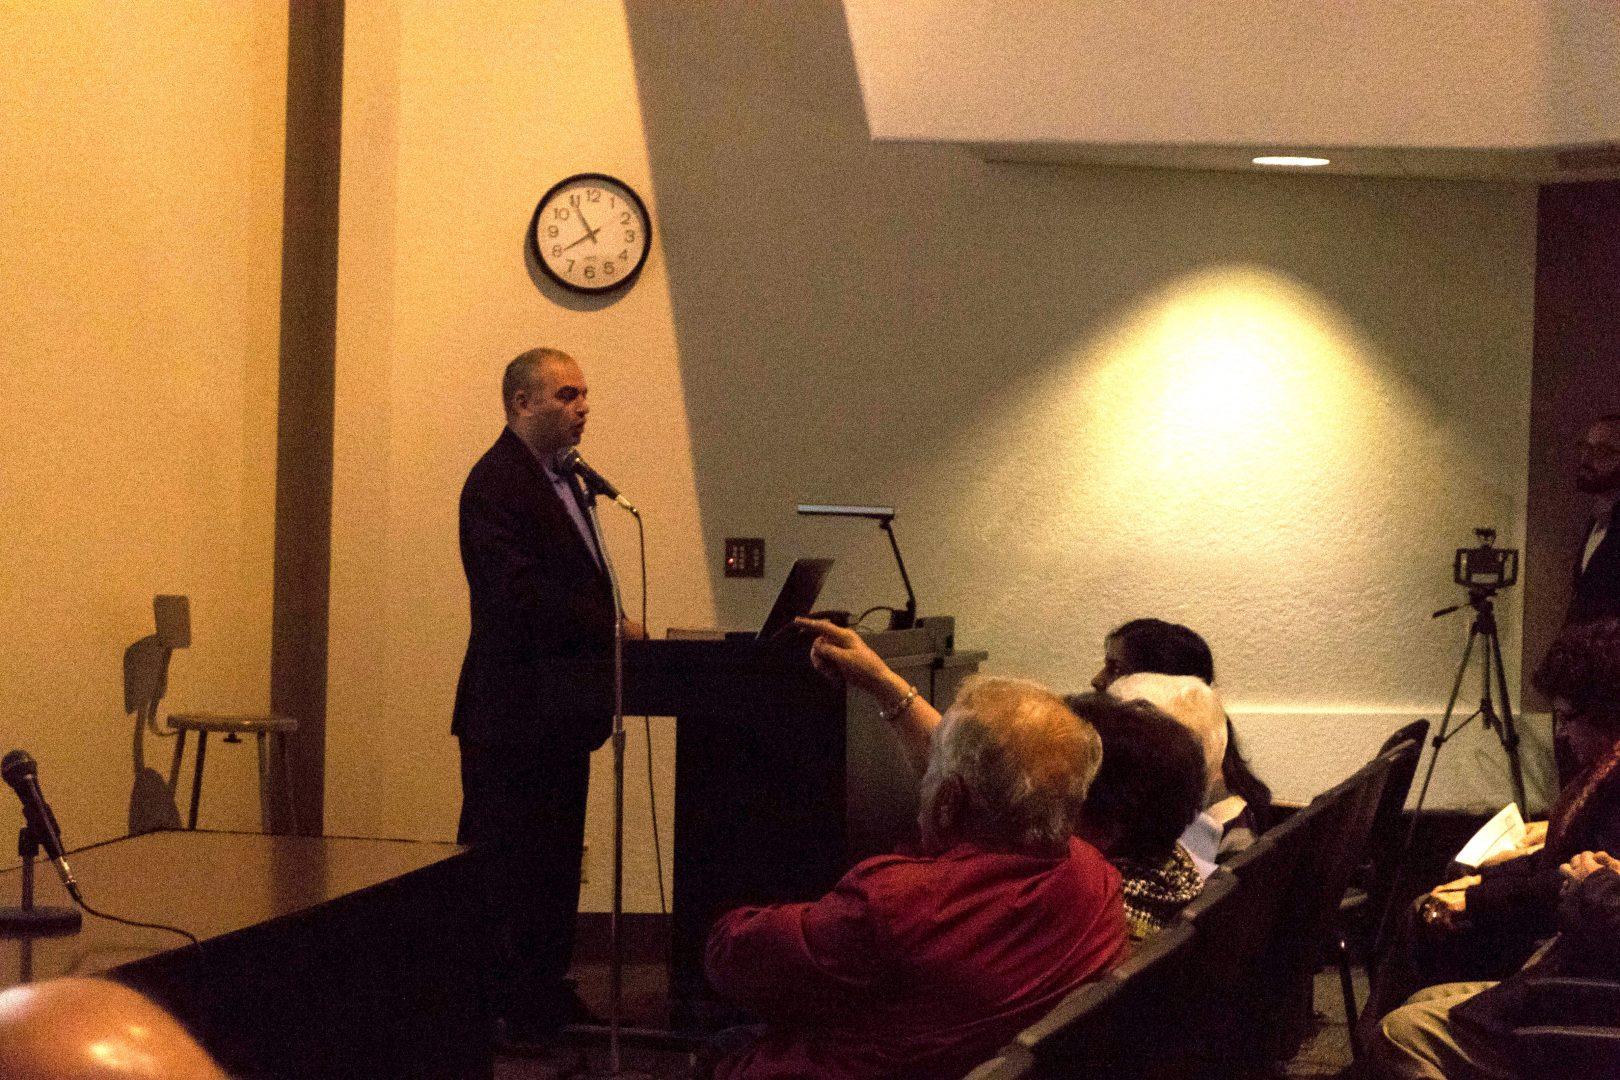 Dr. Hayk Demoyan, a U.S. Fulbright scholar came to Fresno State’s University Business Center to give a lecture entitled, “Multiple Identities and Memories of the Armenian World,” Monday night. (Alyssa Honore/The Collegian)